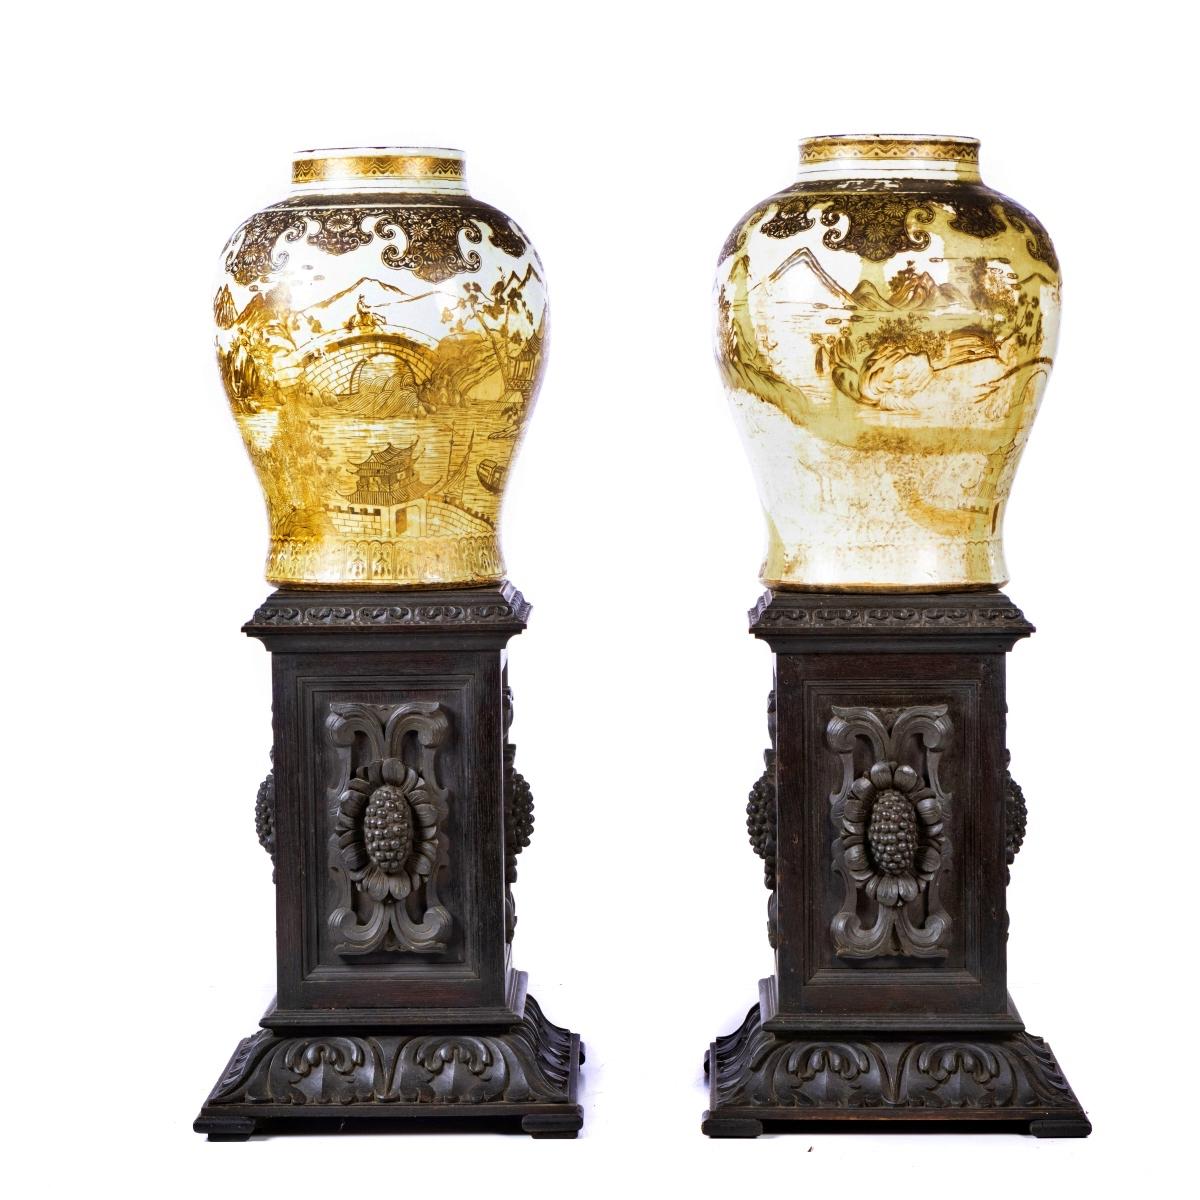 Rare Pair of Jars
A Chinese porcelain end 19th Century
Landscape decoration with pagodas.
Sitting on carved wooden bases.
Old restorations, good condition
Height (jars) 85 cm. Height: (total) 137 cm.